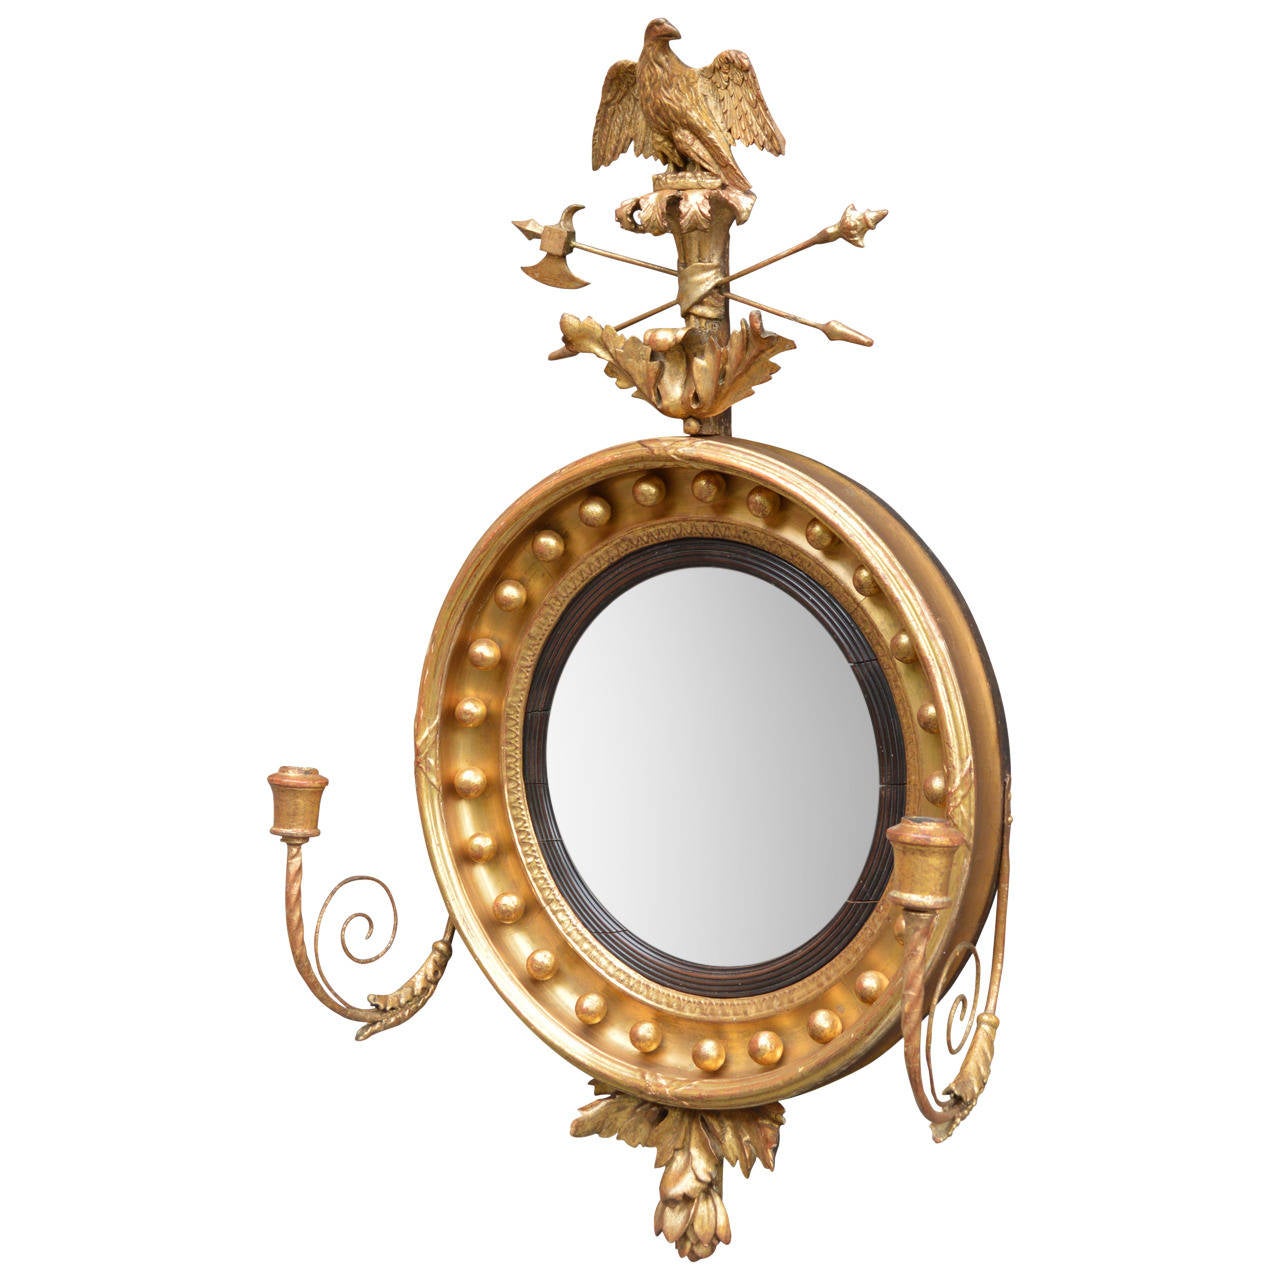 Beautiful convex butler's mirror finished in gold leaf over red poliment.  Original 11.38